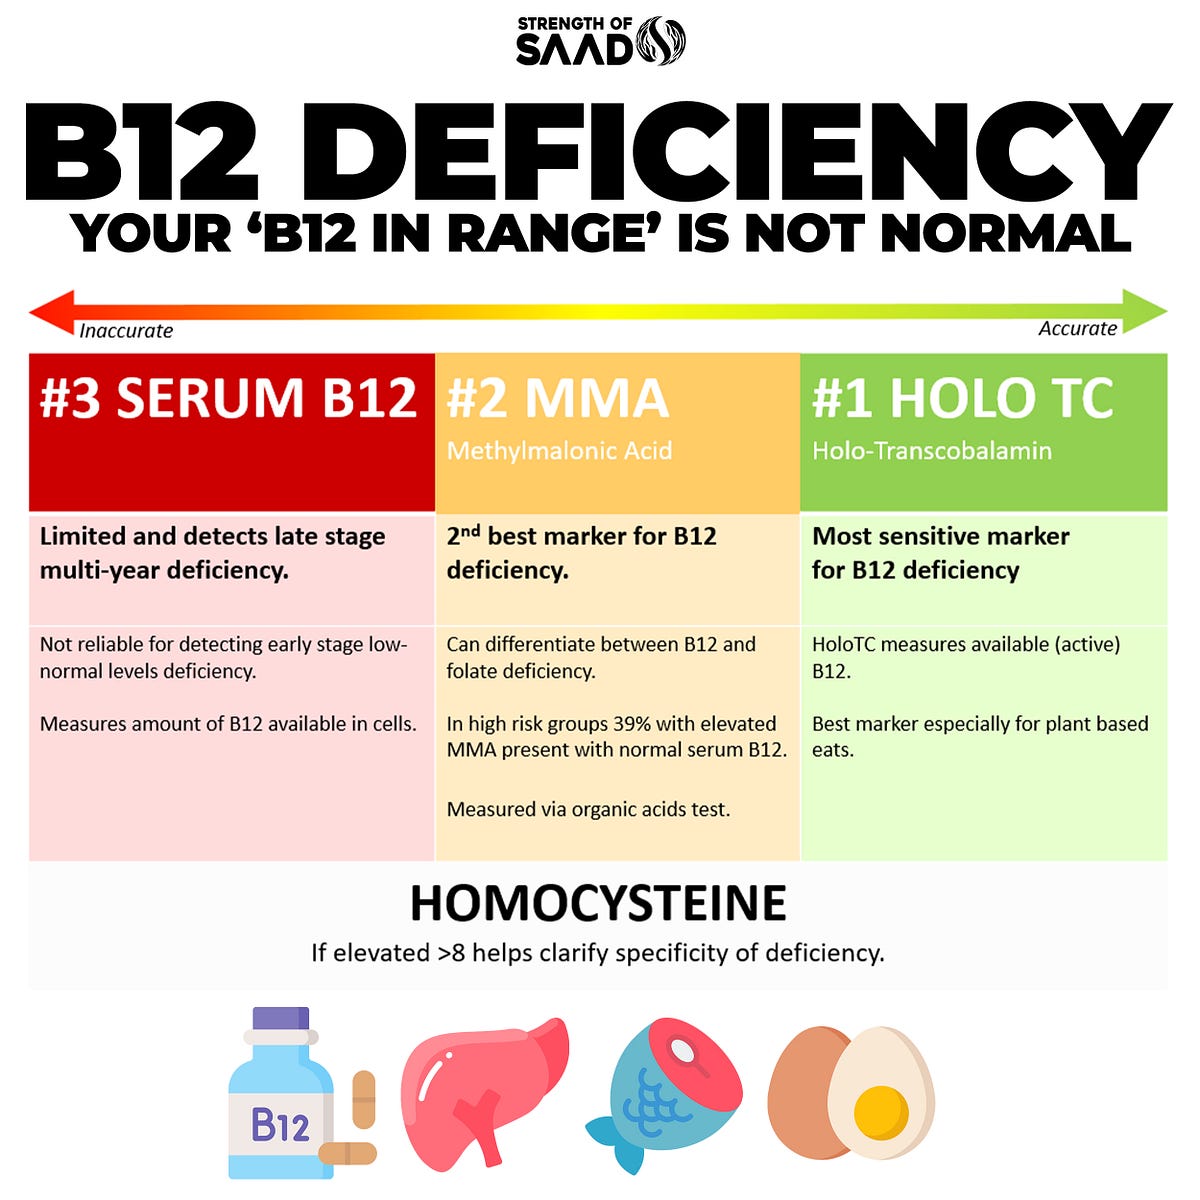 How To Detect A B12 Deficiency. Just because your B12 is in range… | by  Strength Of Saad | Medium